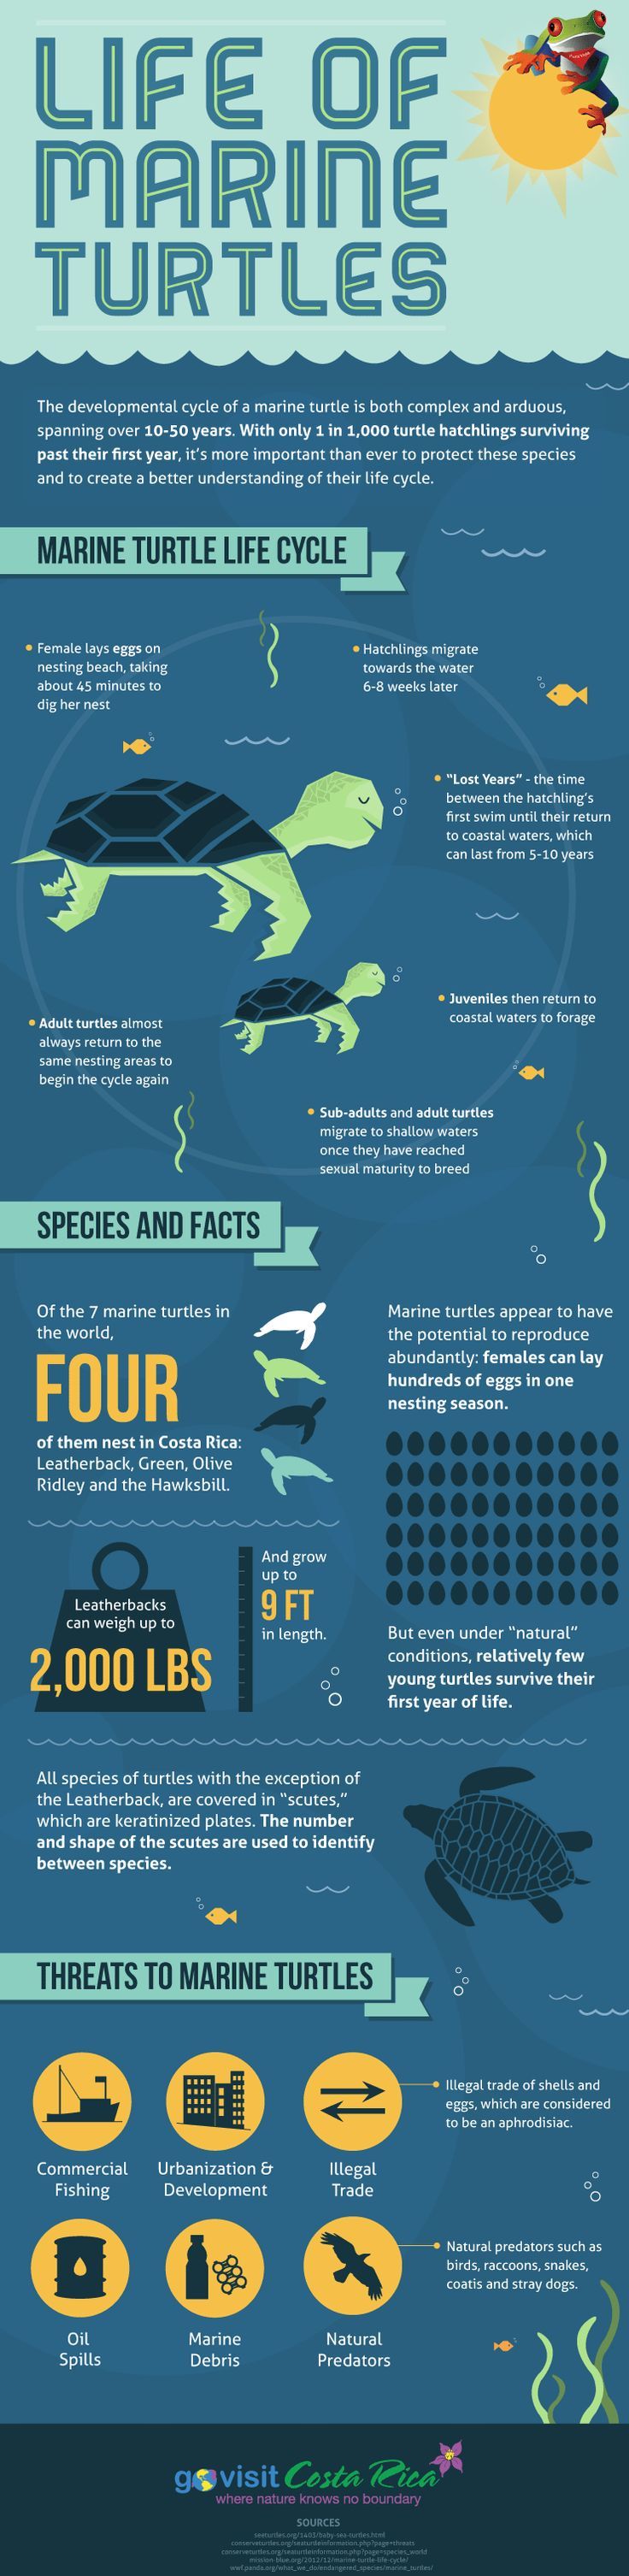 The Life of Marine Turtles | Daily InfographicDaily Infographic